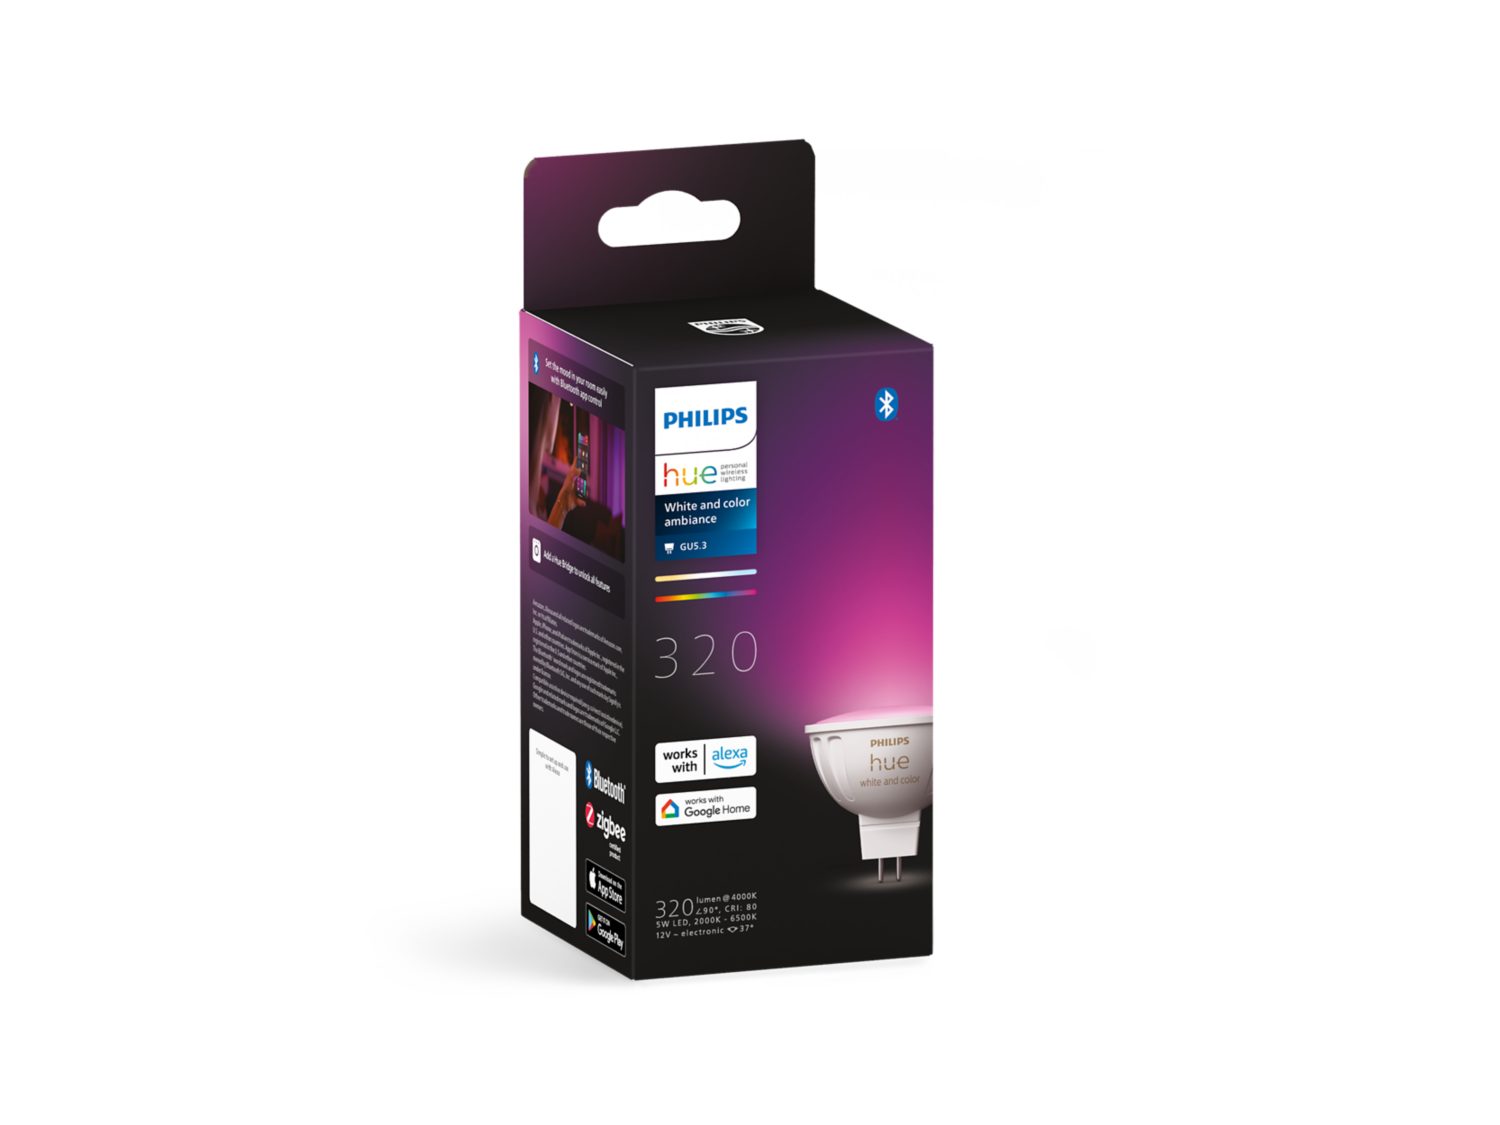 Philips Hue MR16 Globe - White and Colour boxed